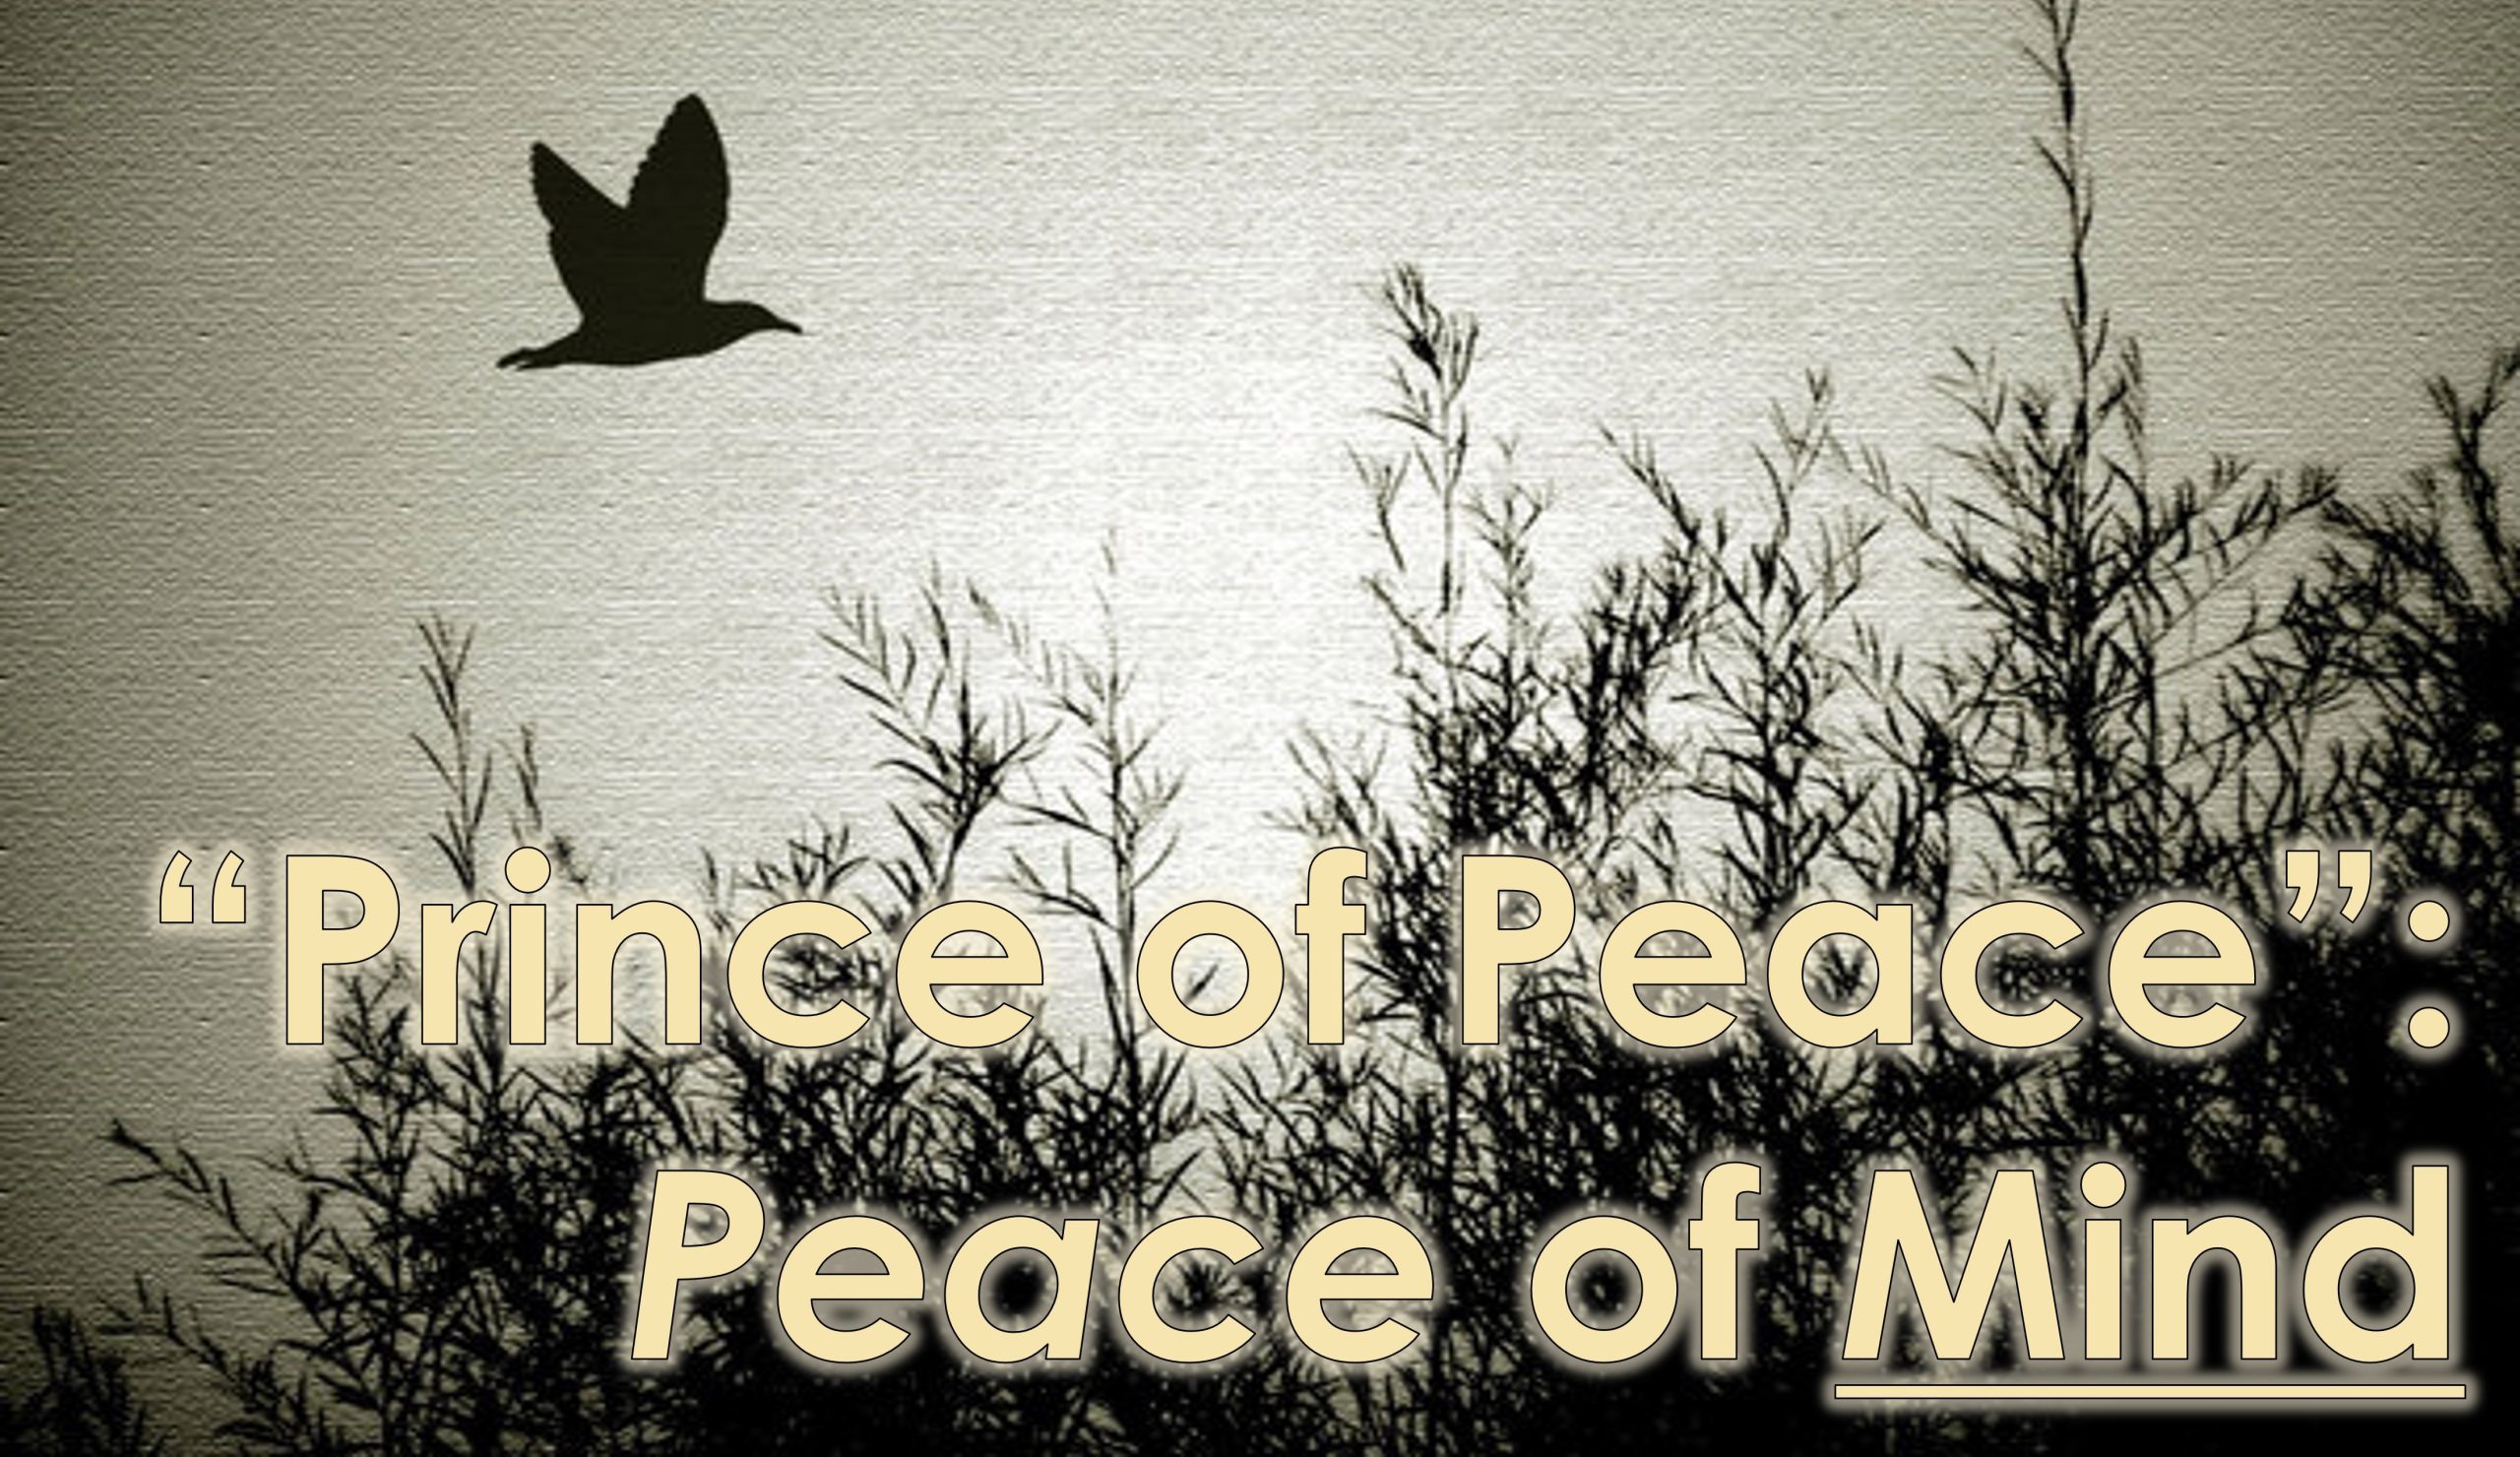 You are currently viewing “Prince of Peace”: Peace of Mind – December 10th